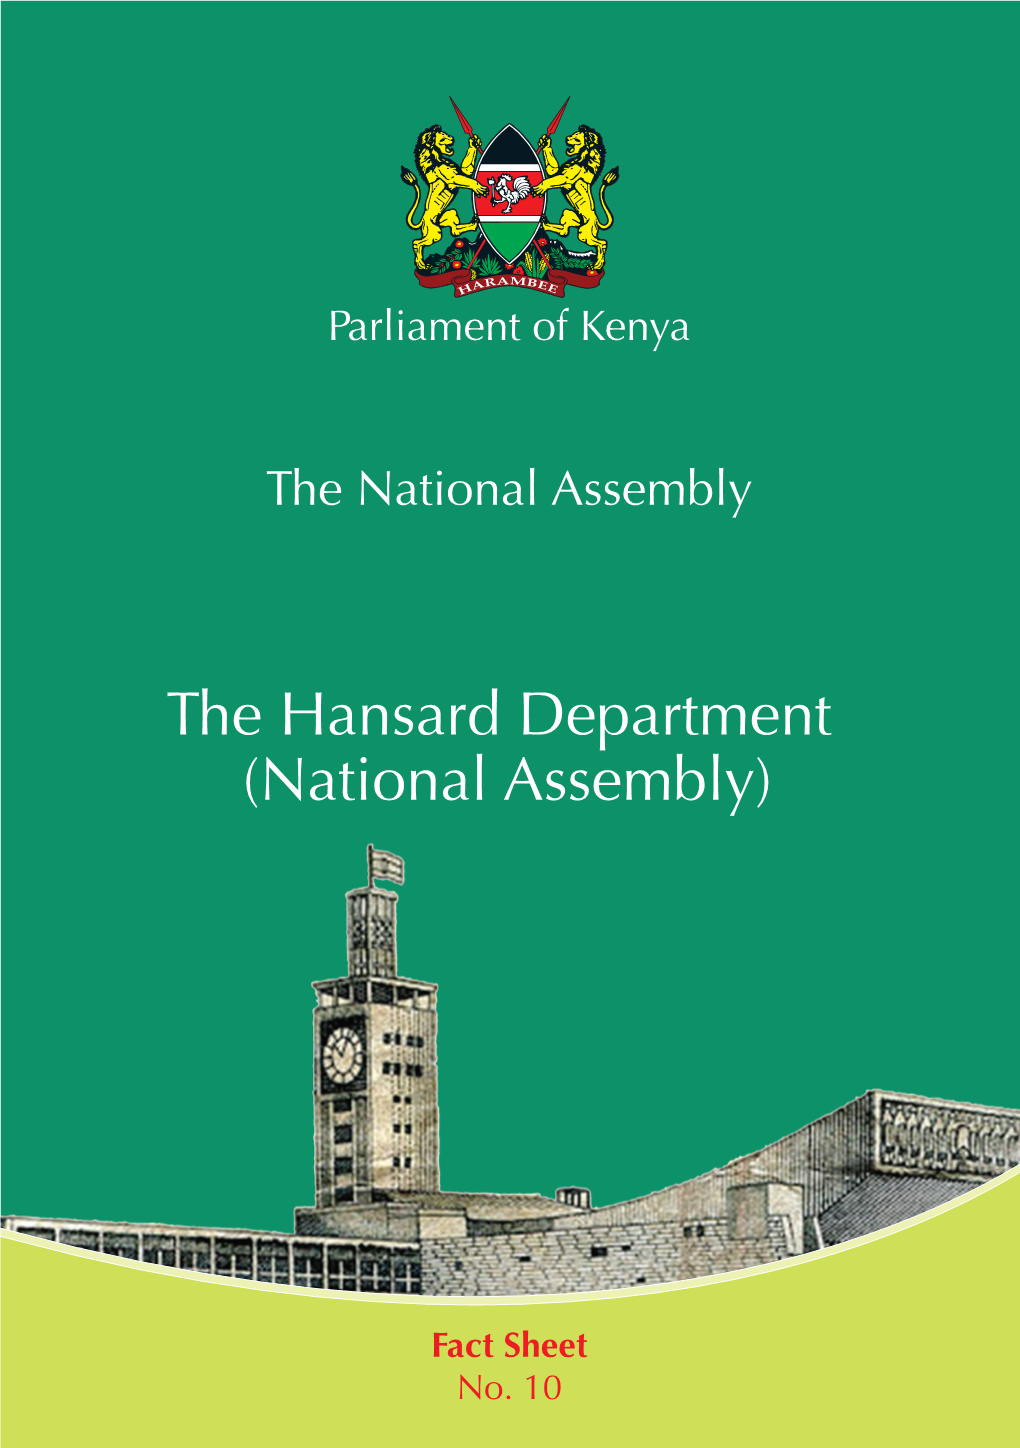 The Hansard Department (National Assembly)